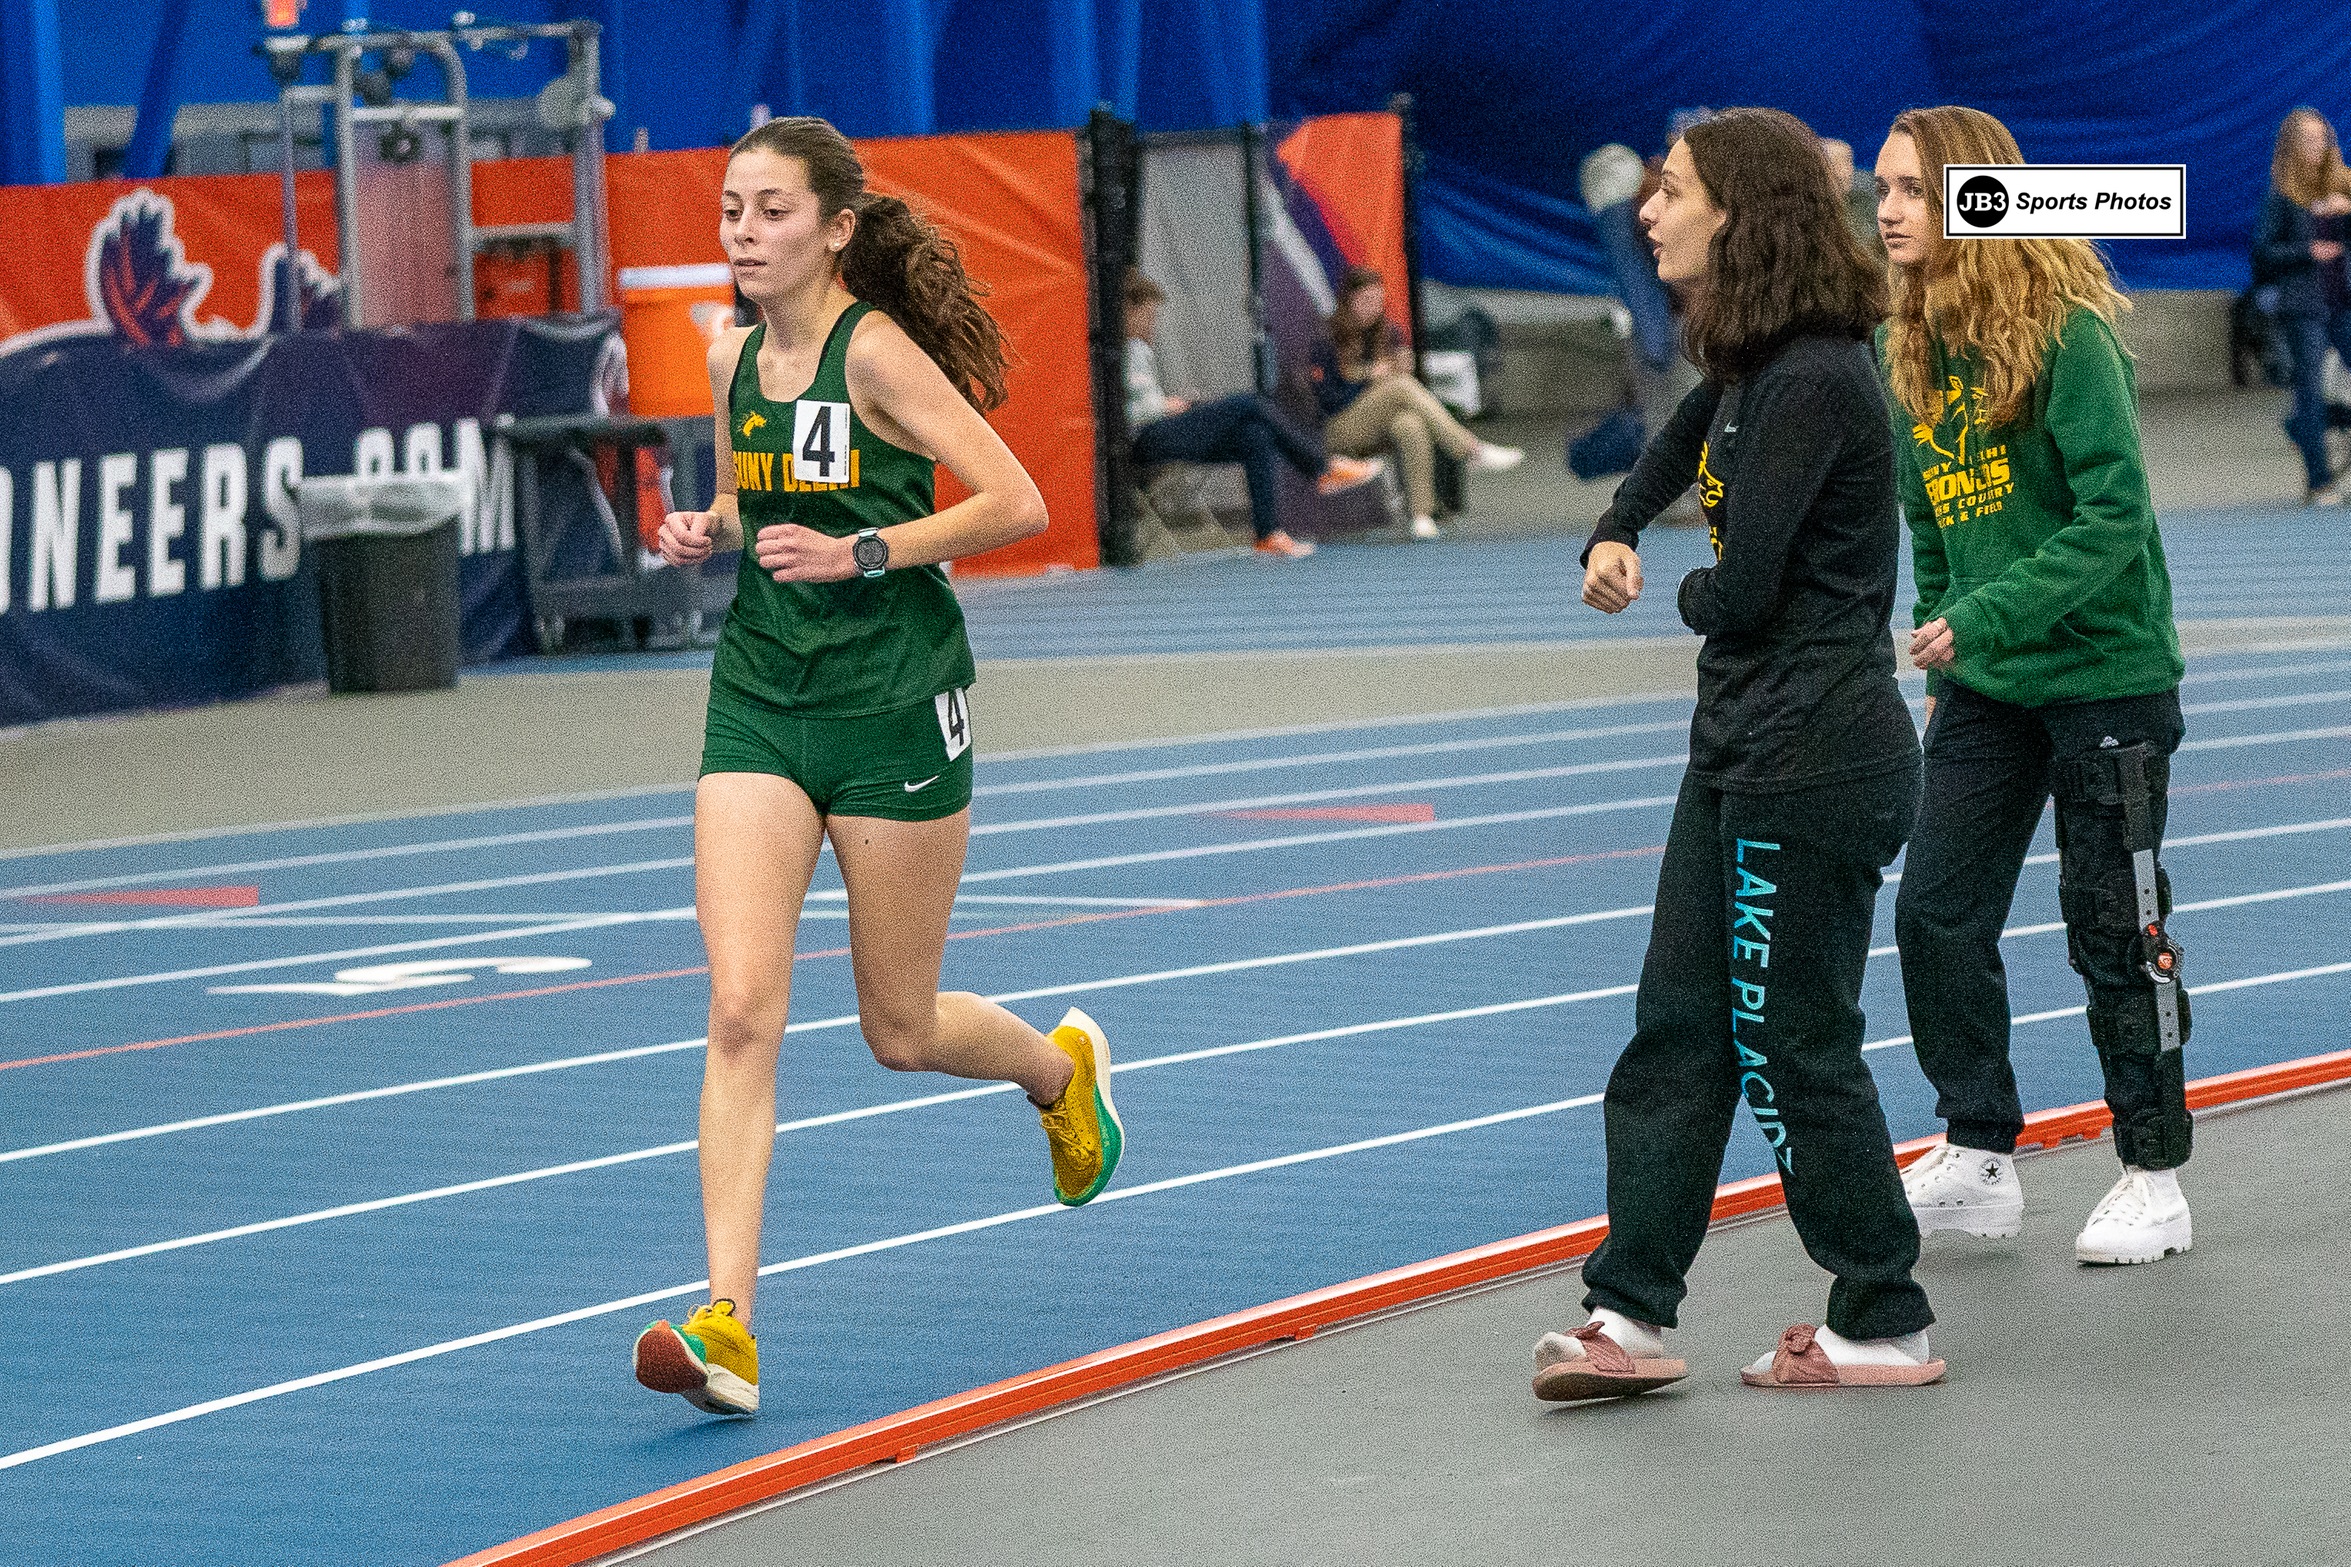 Junior Marissa Lombardi becomes second bronco to break 10,000 Meter Record within two weeks